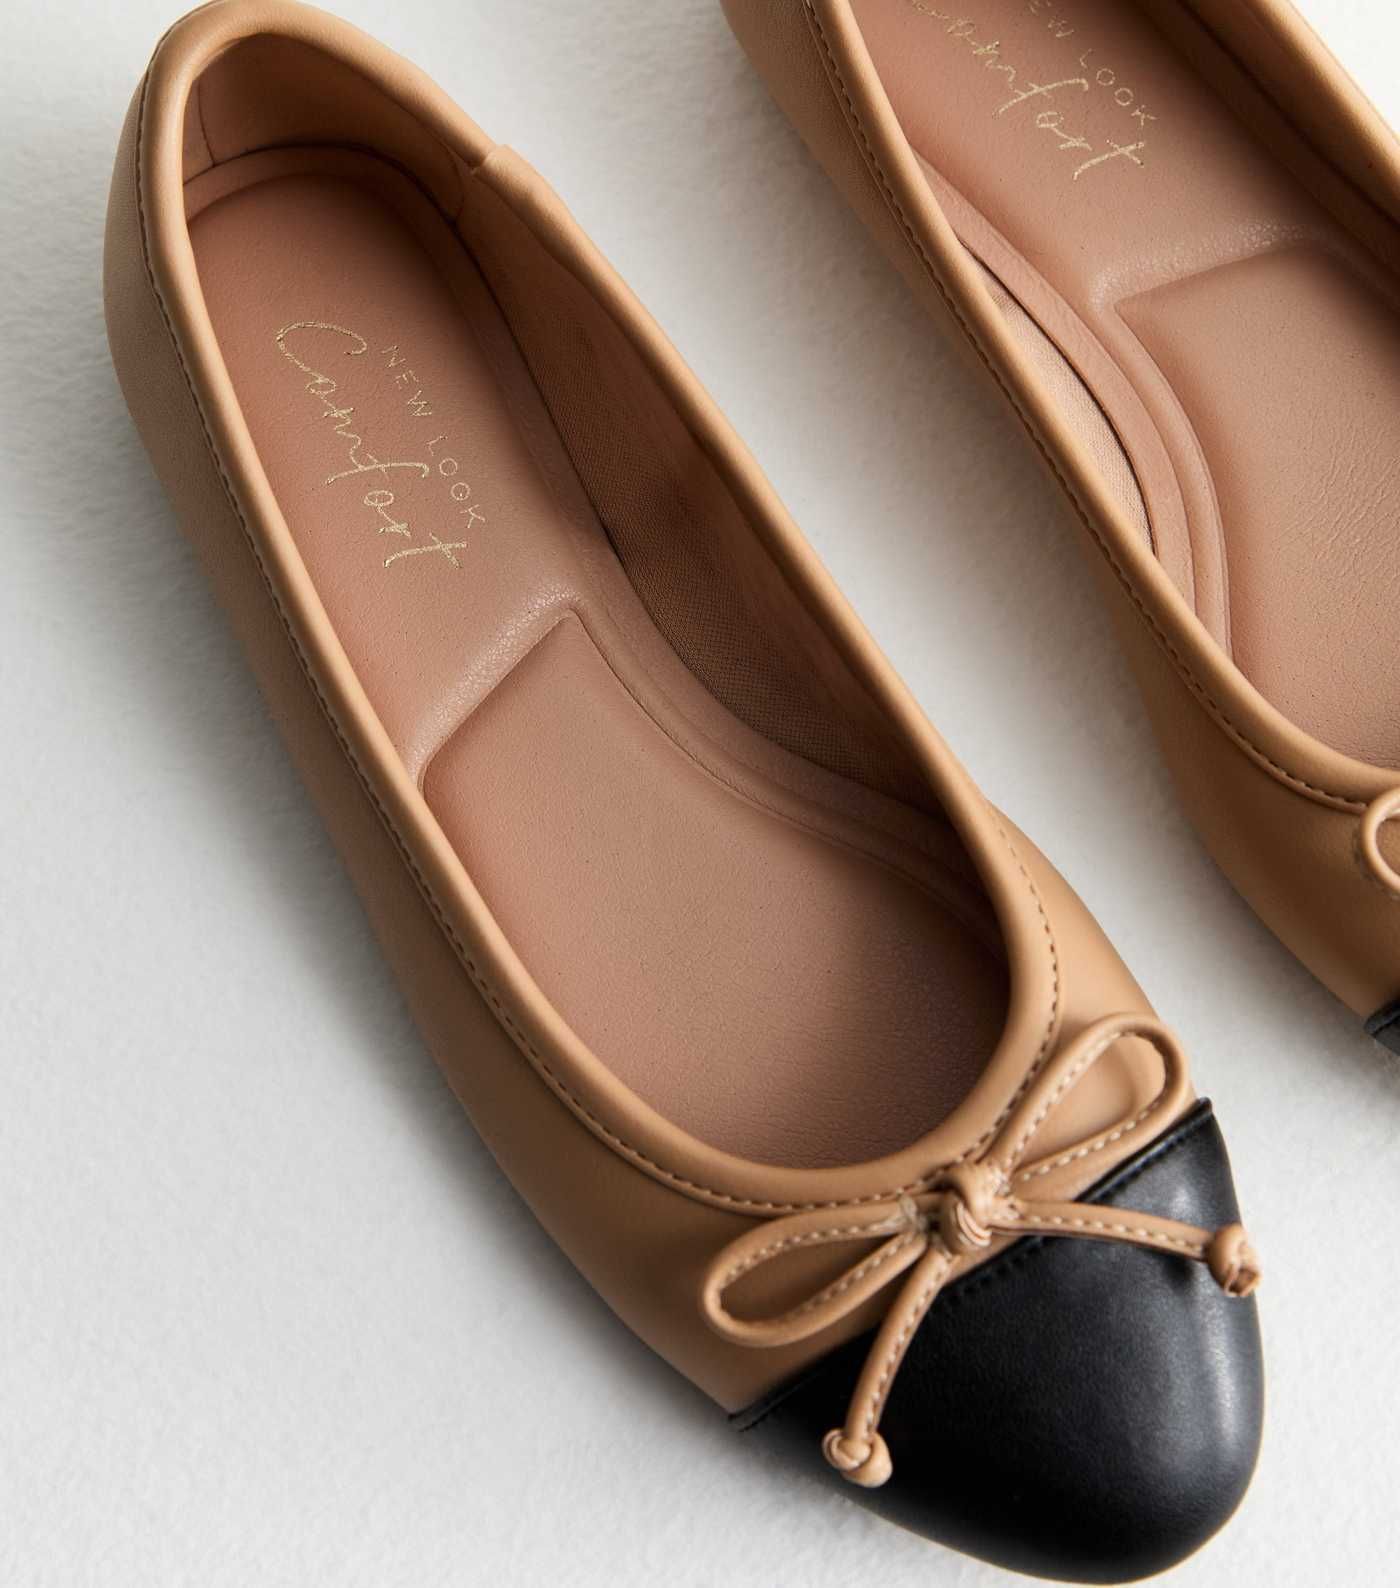 Camel Leather-Look Contrast Ballerina Pumps
						
						Add to Saved Items
						Remove from Sav... | New Look (UK)